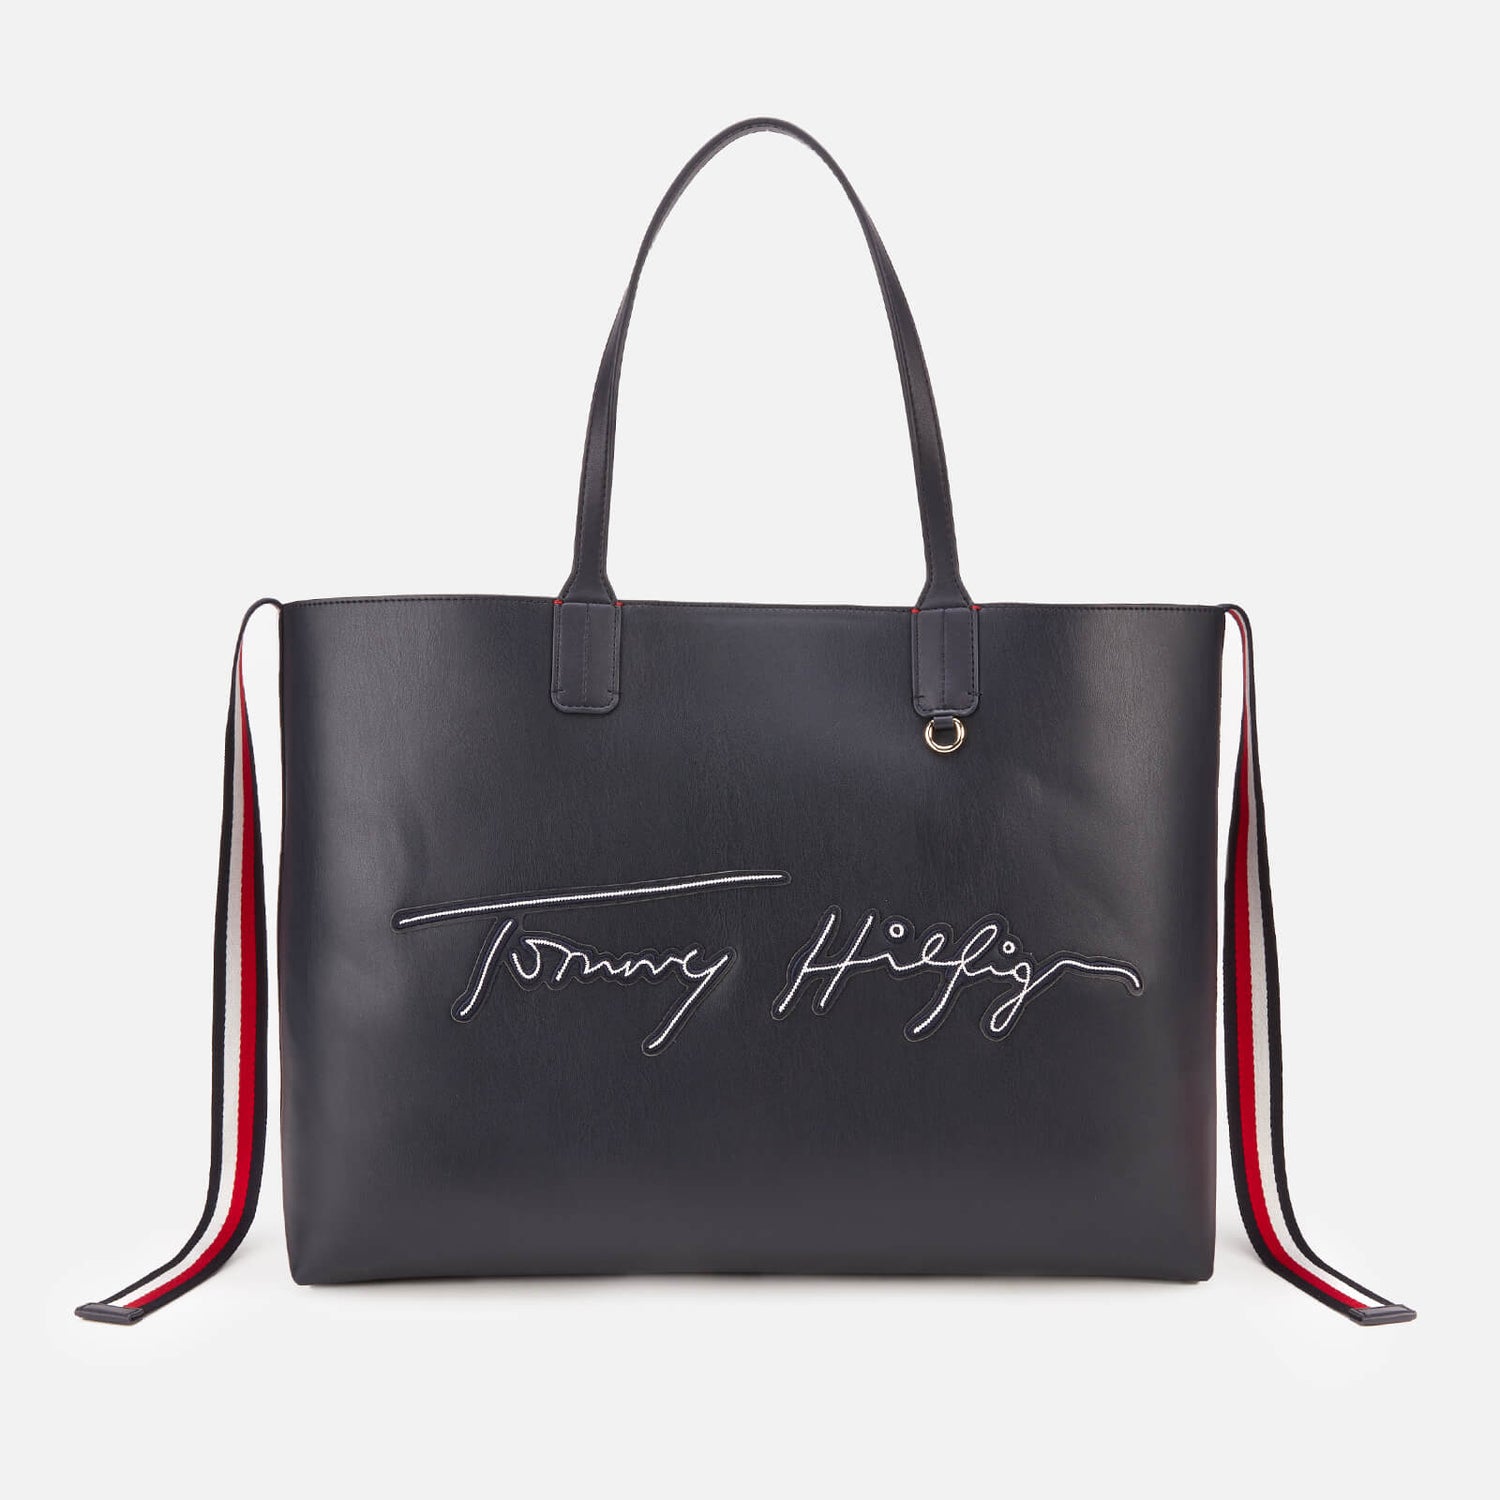 Tommy Hilfiger Women's Iconic Signature Tote Bag - Desert Sky